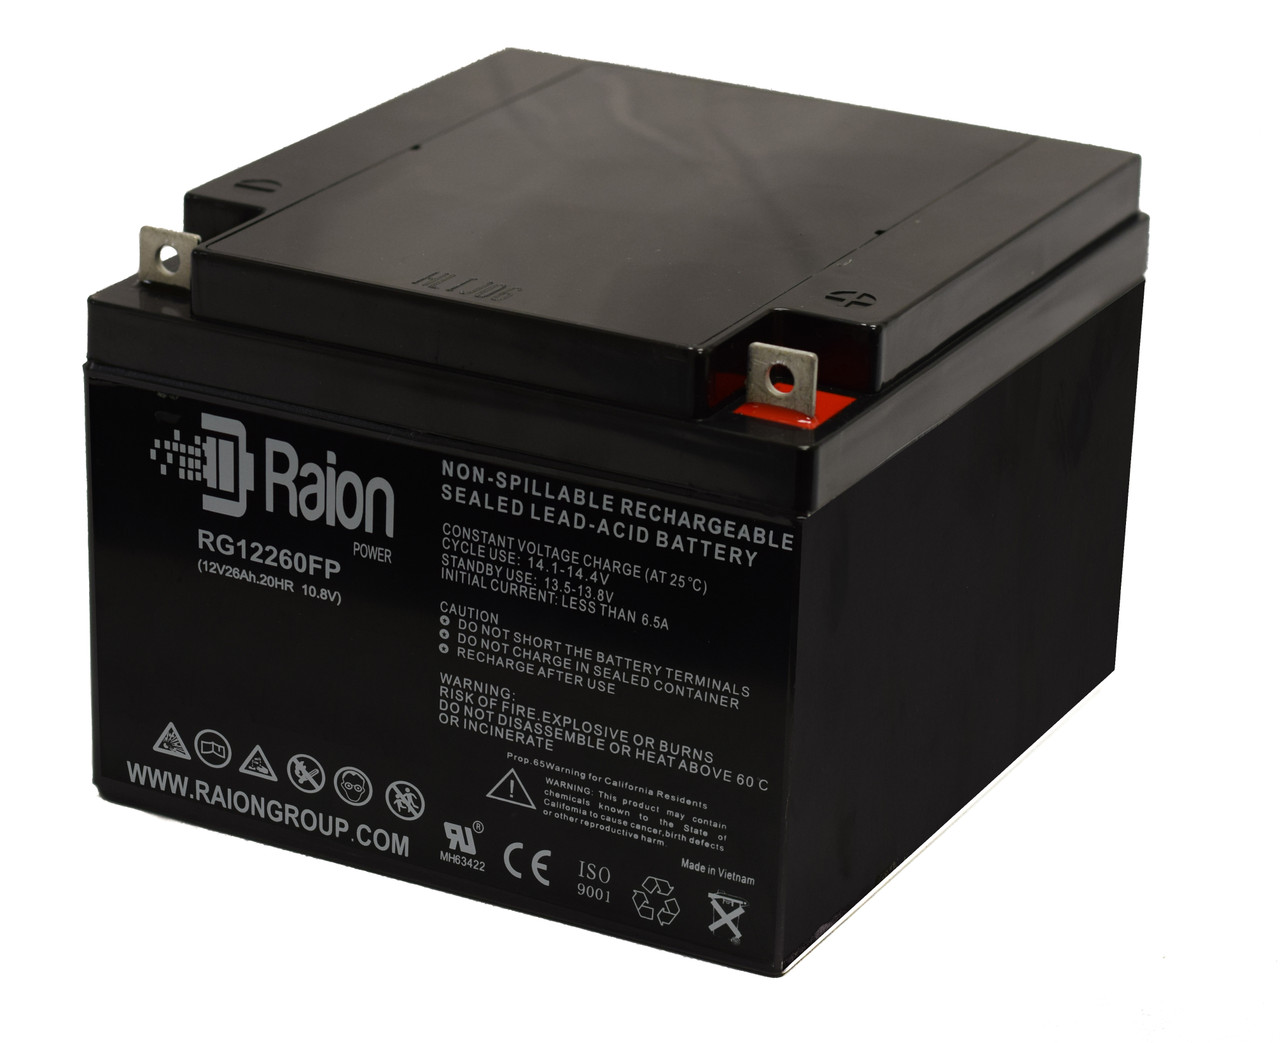 Raion Power Replacement 12V 26Ah Battery for Amsco 3080 RL Surgical Table Motor - 1 Pack